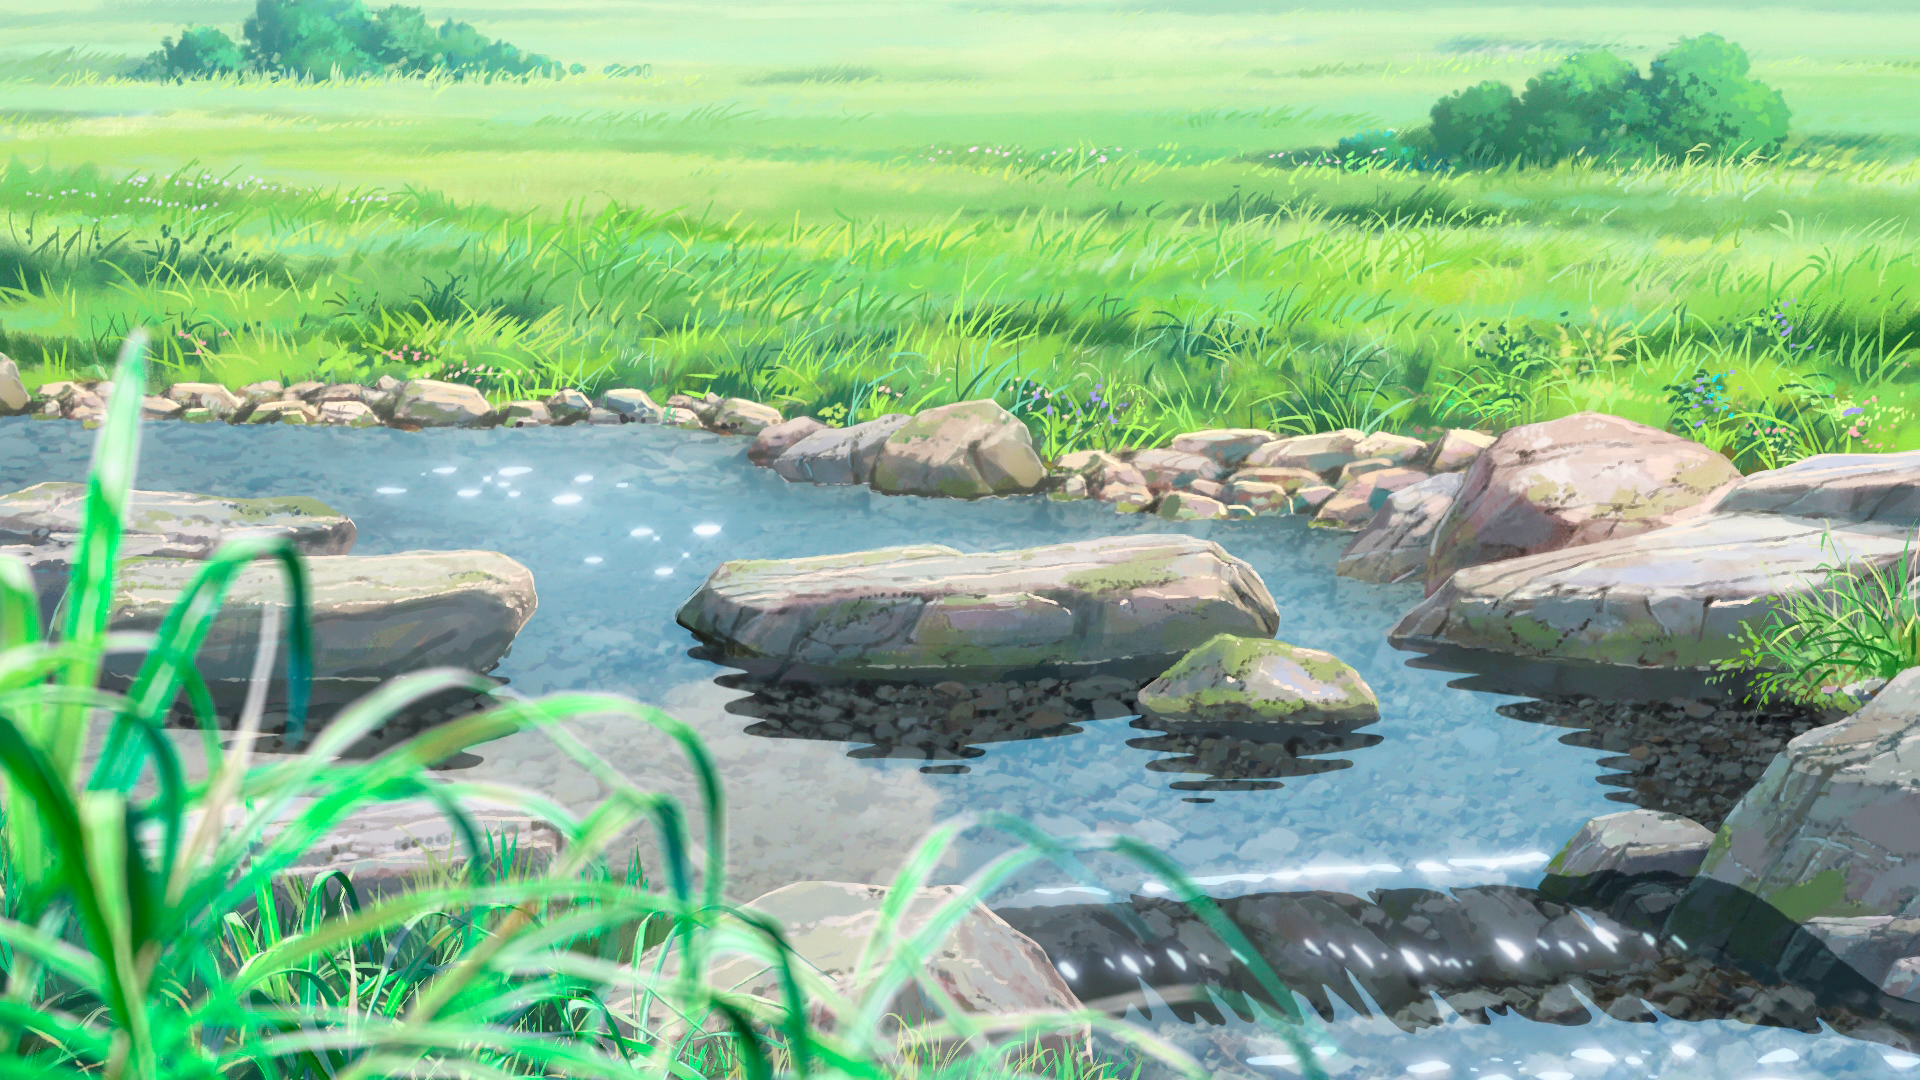 three children playing in the river in anime style